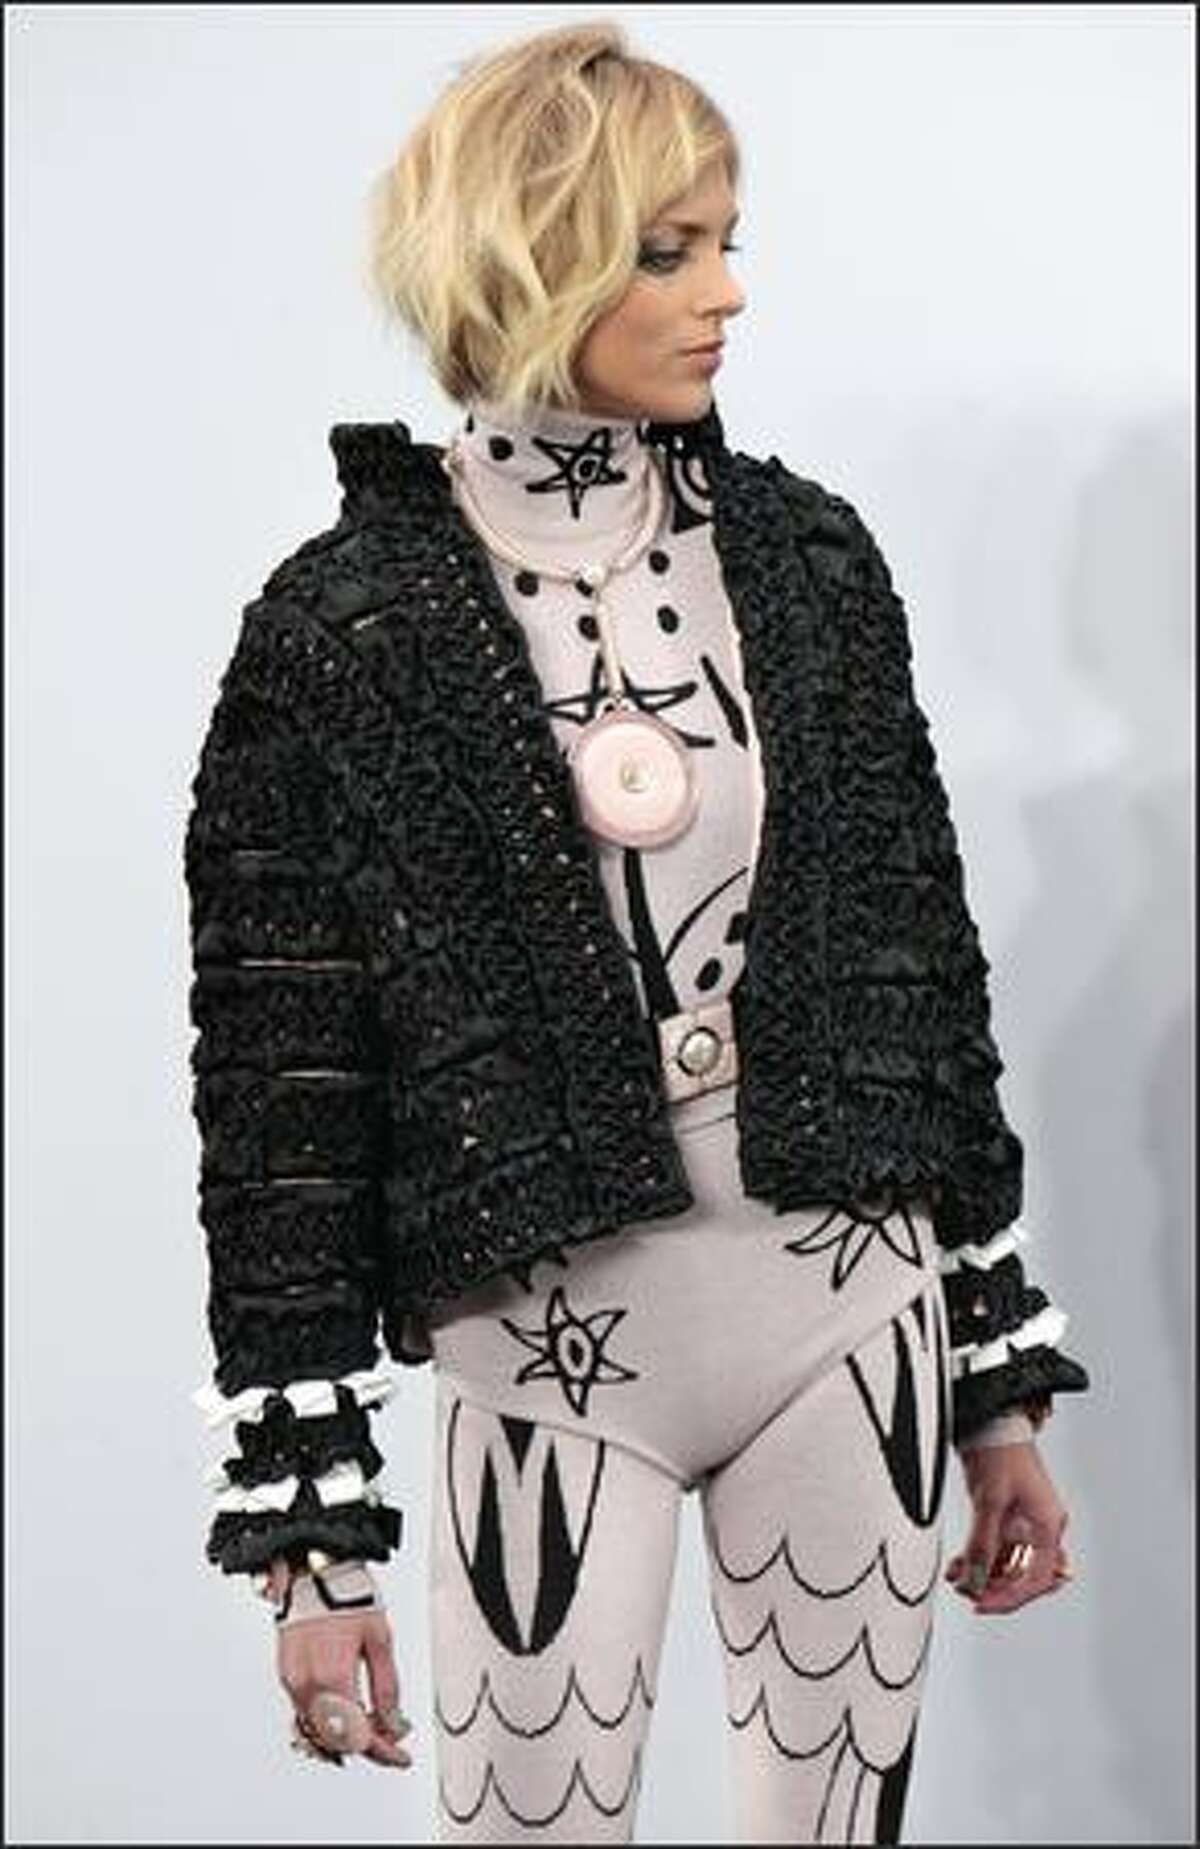 A model presents a creation by German designer Karl Lagerfeld for Chanel during the autumn/winter 2009 ready-to-wear collection show in Paris on Tuesday.